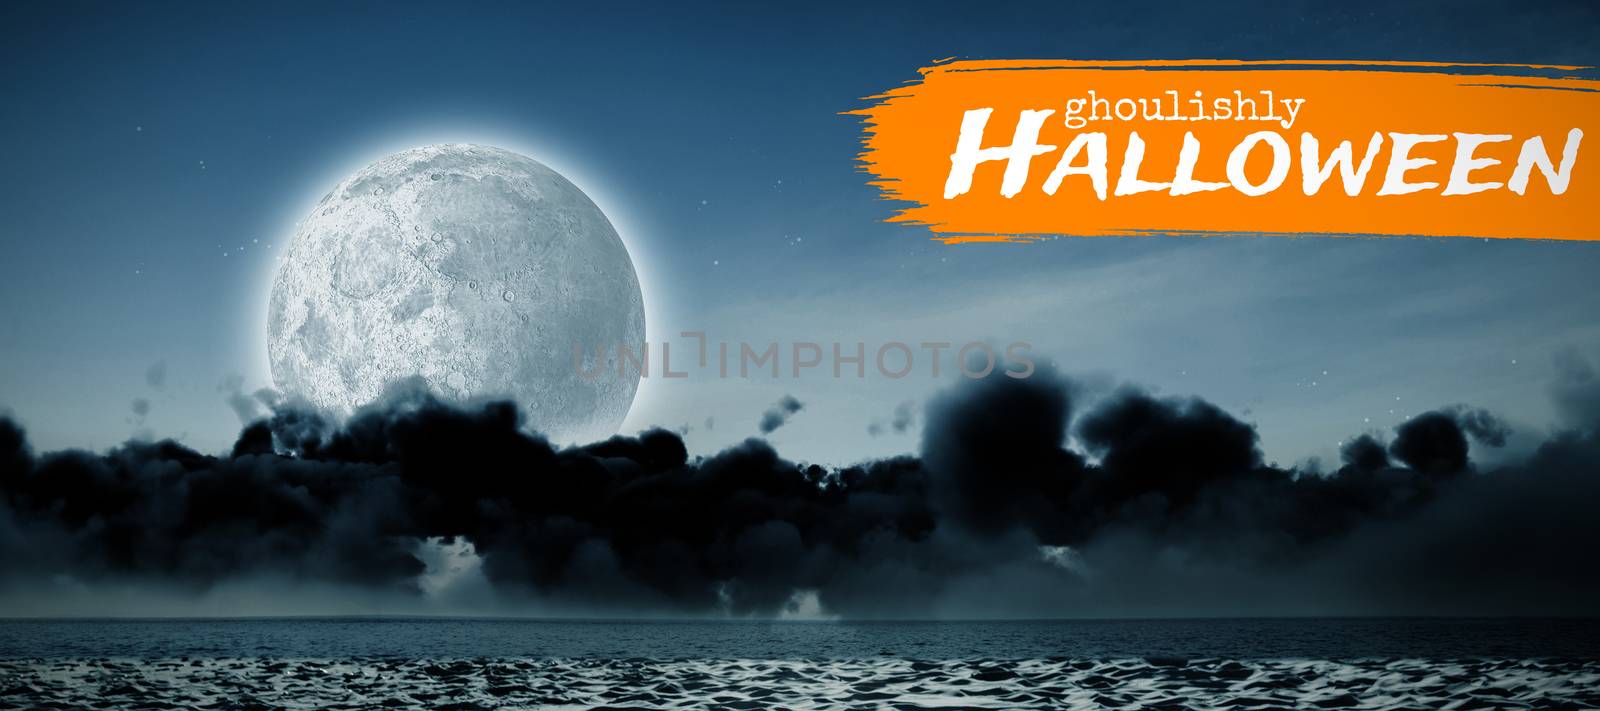 Composite image of graphic image of ghoulishly halloween text by Wavebreakmedia